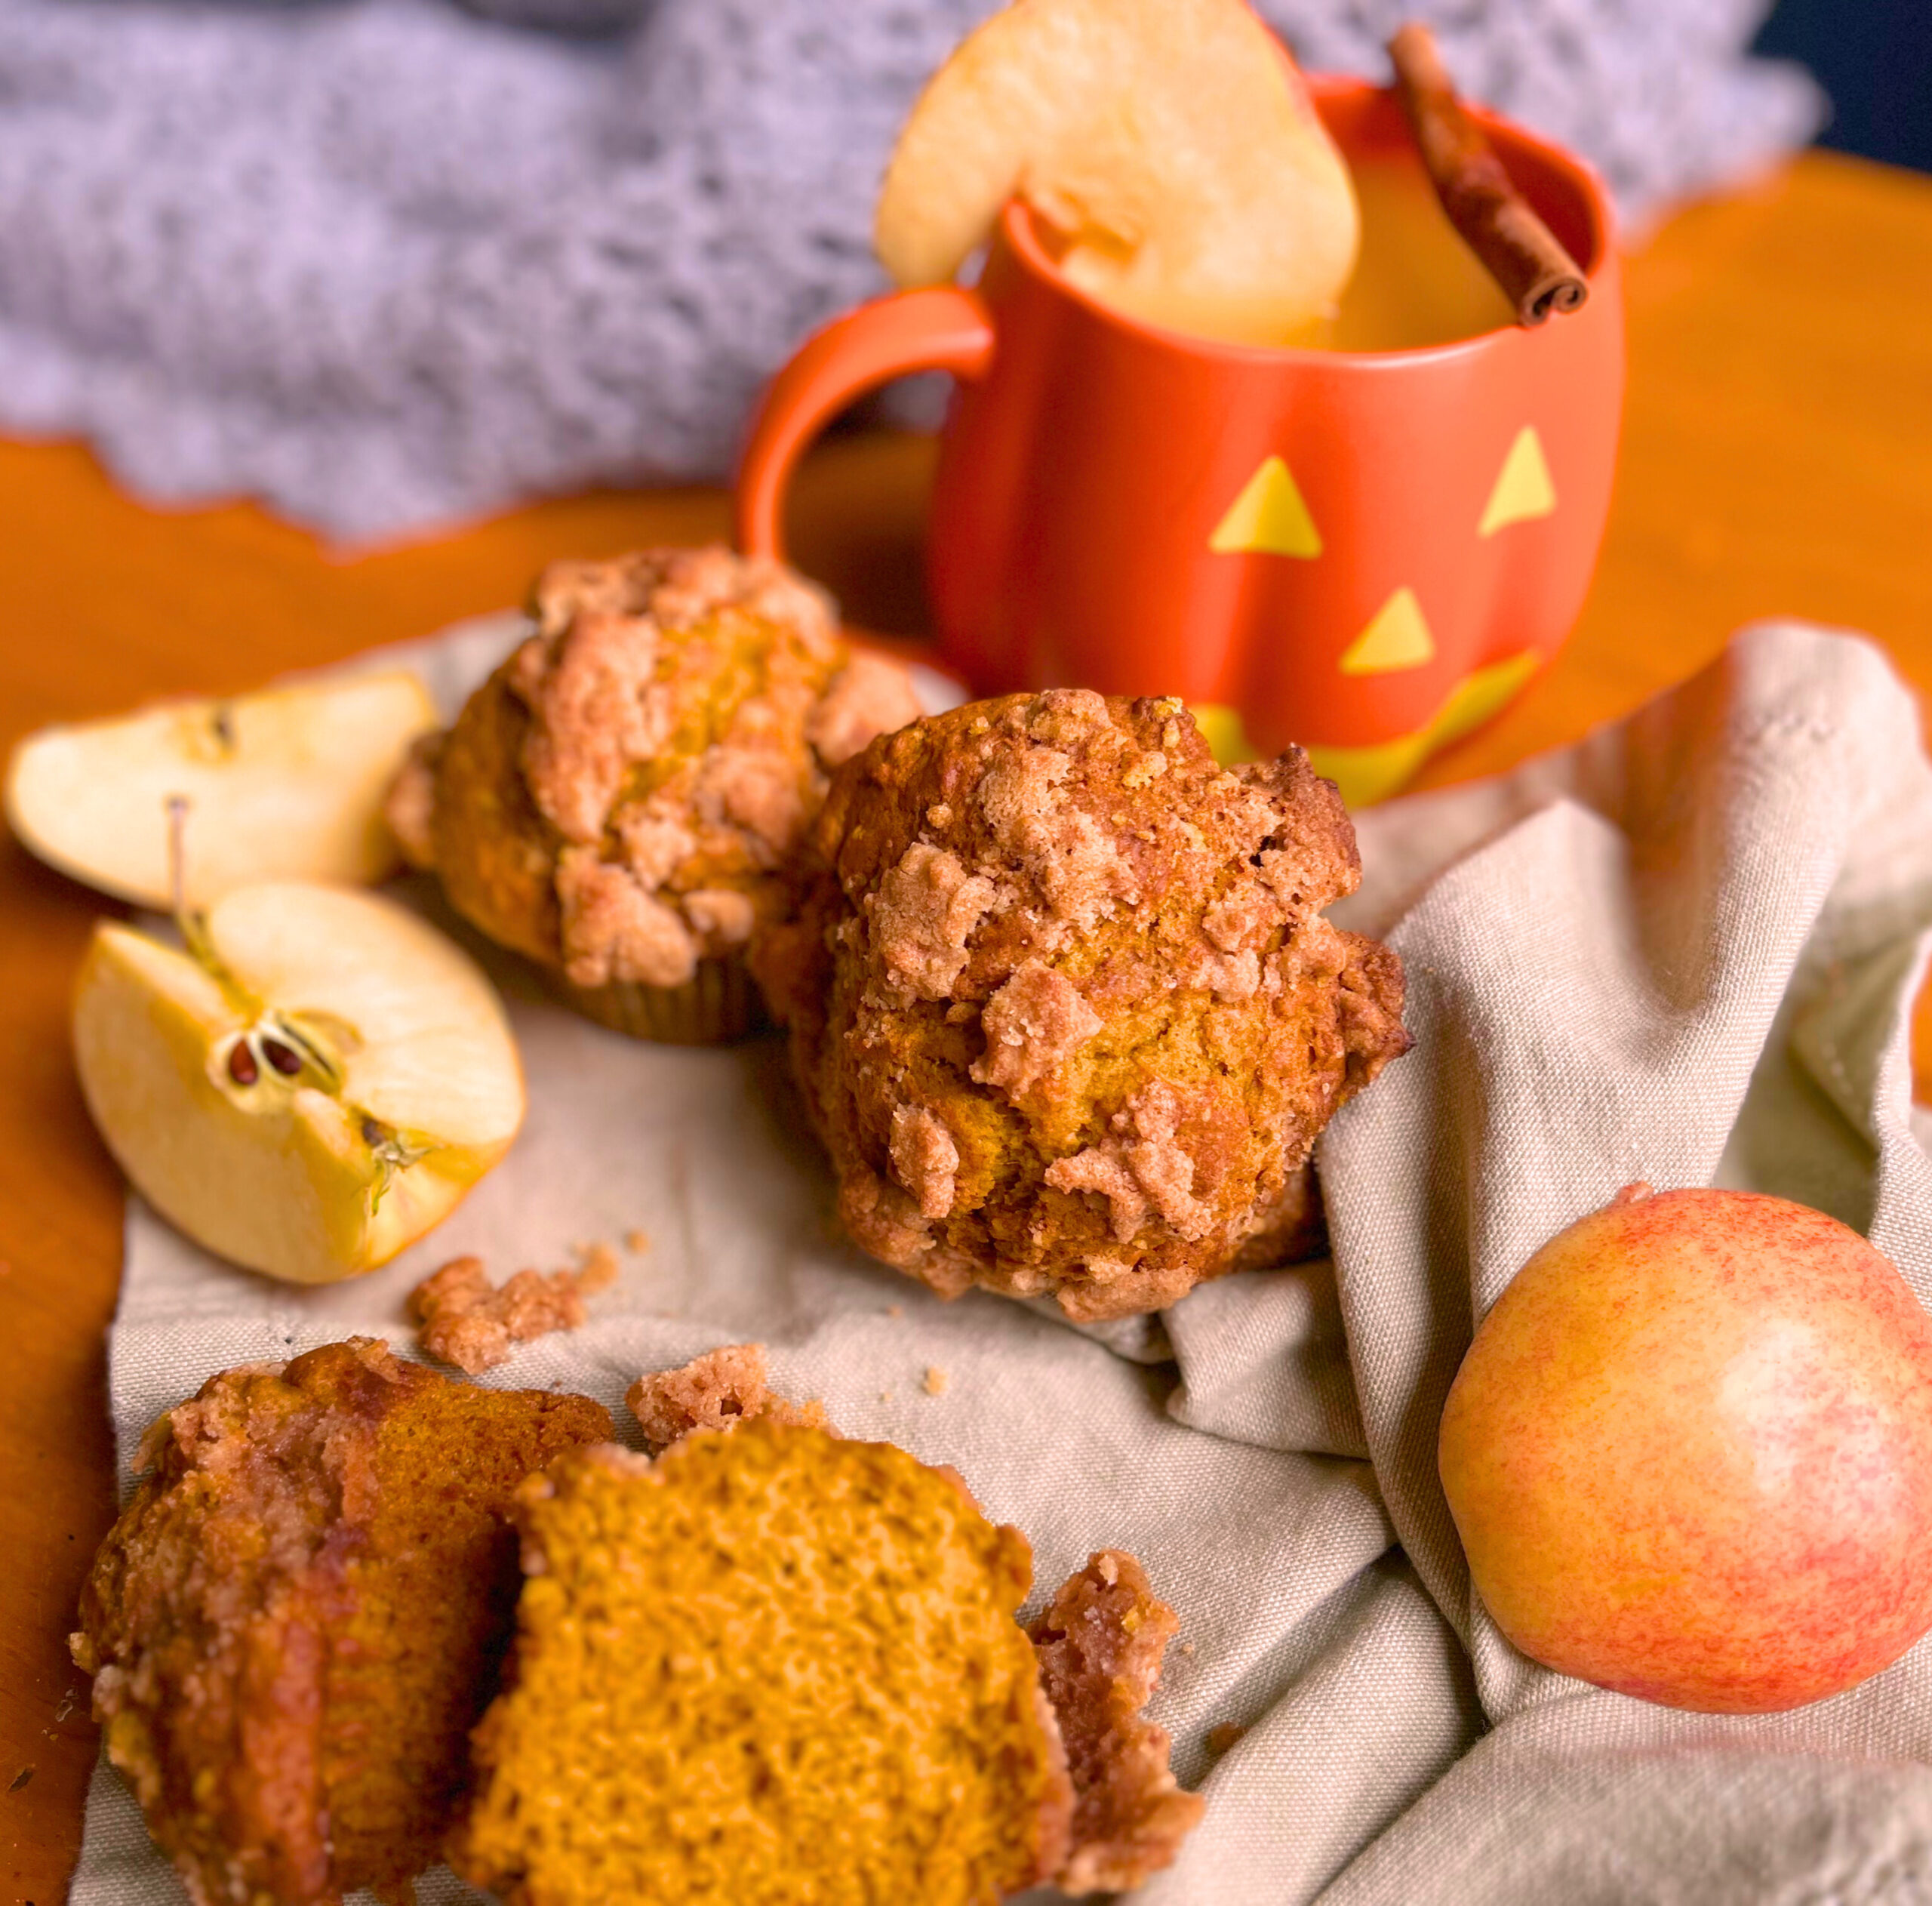 Pumpkin streusel muffins on a light green napkin with cut apples. One muffin in front is cut in half. The two whole muffins in the back are in front of a pumpkin shaped mug with hot apple cider. There is an apple slice on the rim on the mug and a cinnamon stick resting on top of the mug.